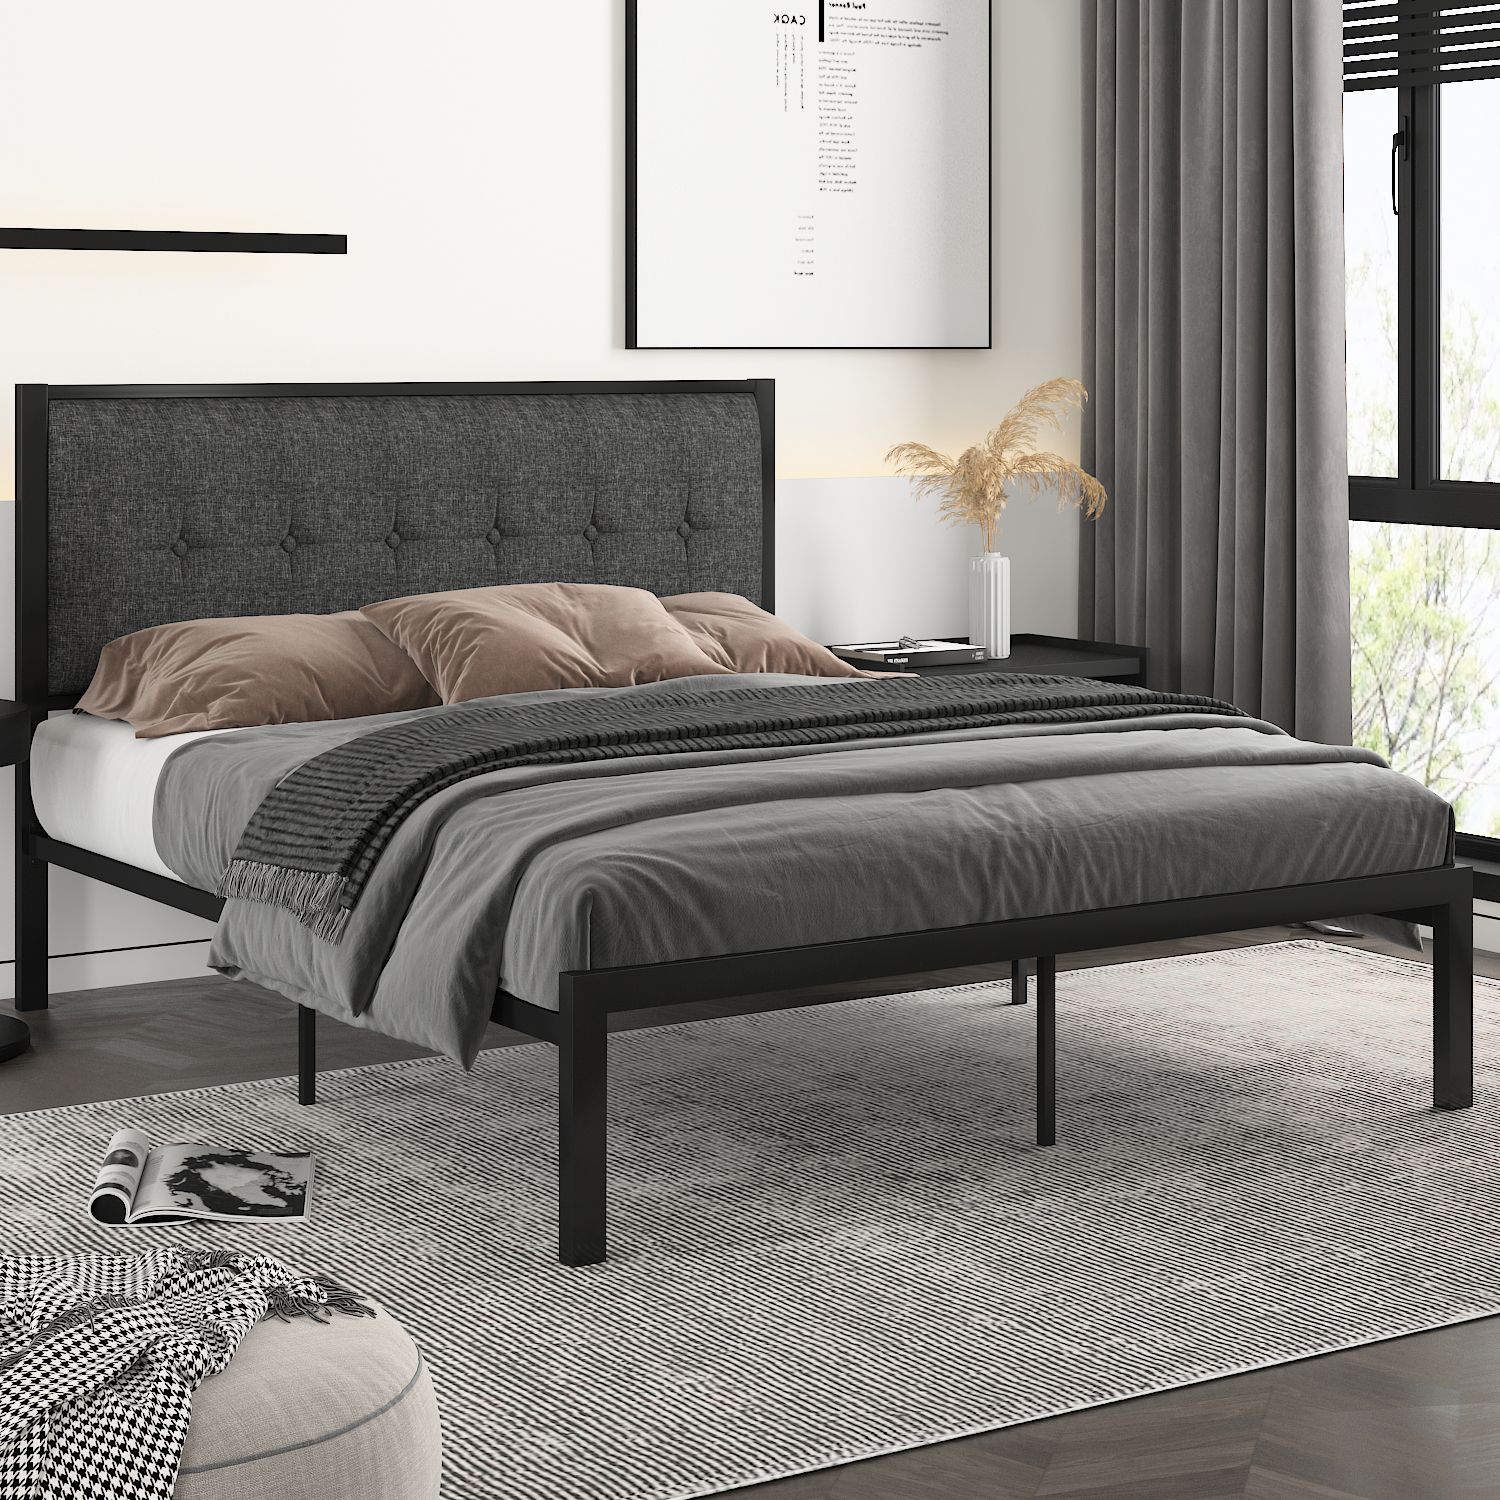 Metal Platform Bed with Tufted Headboard